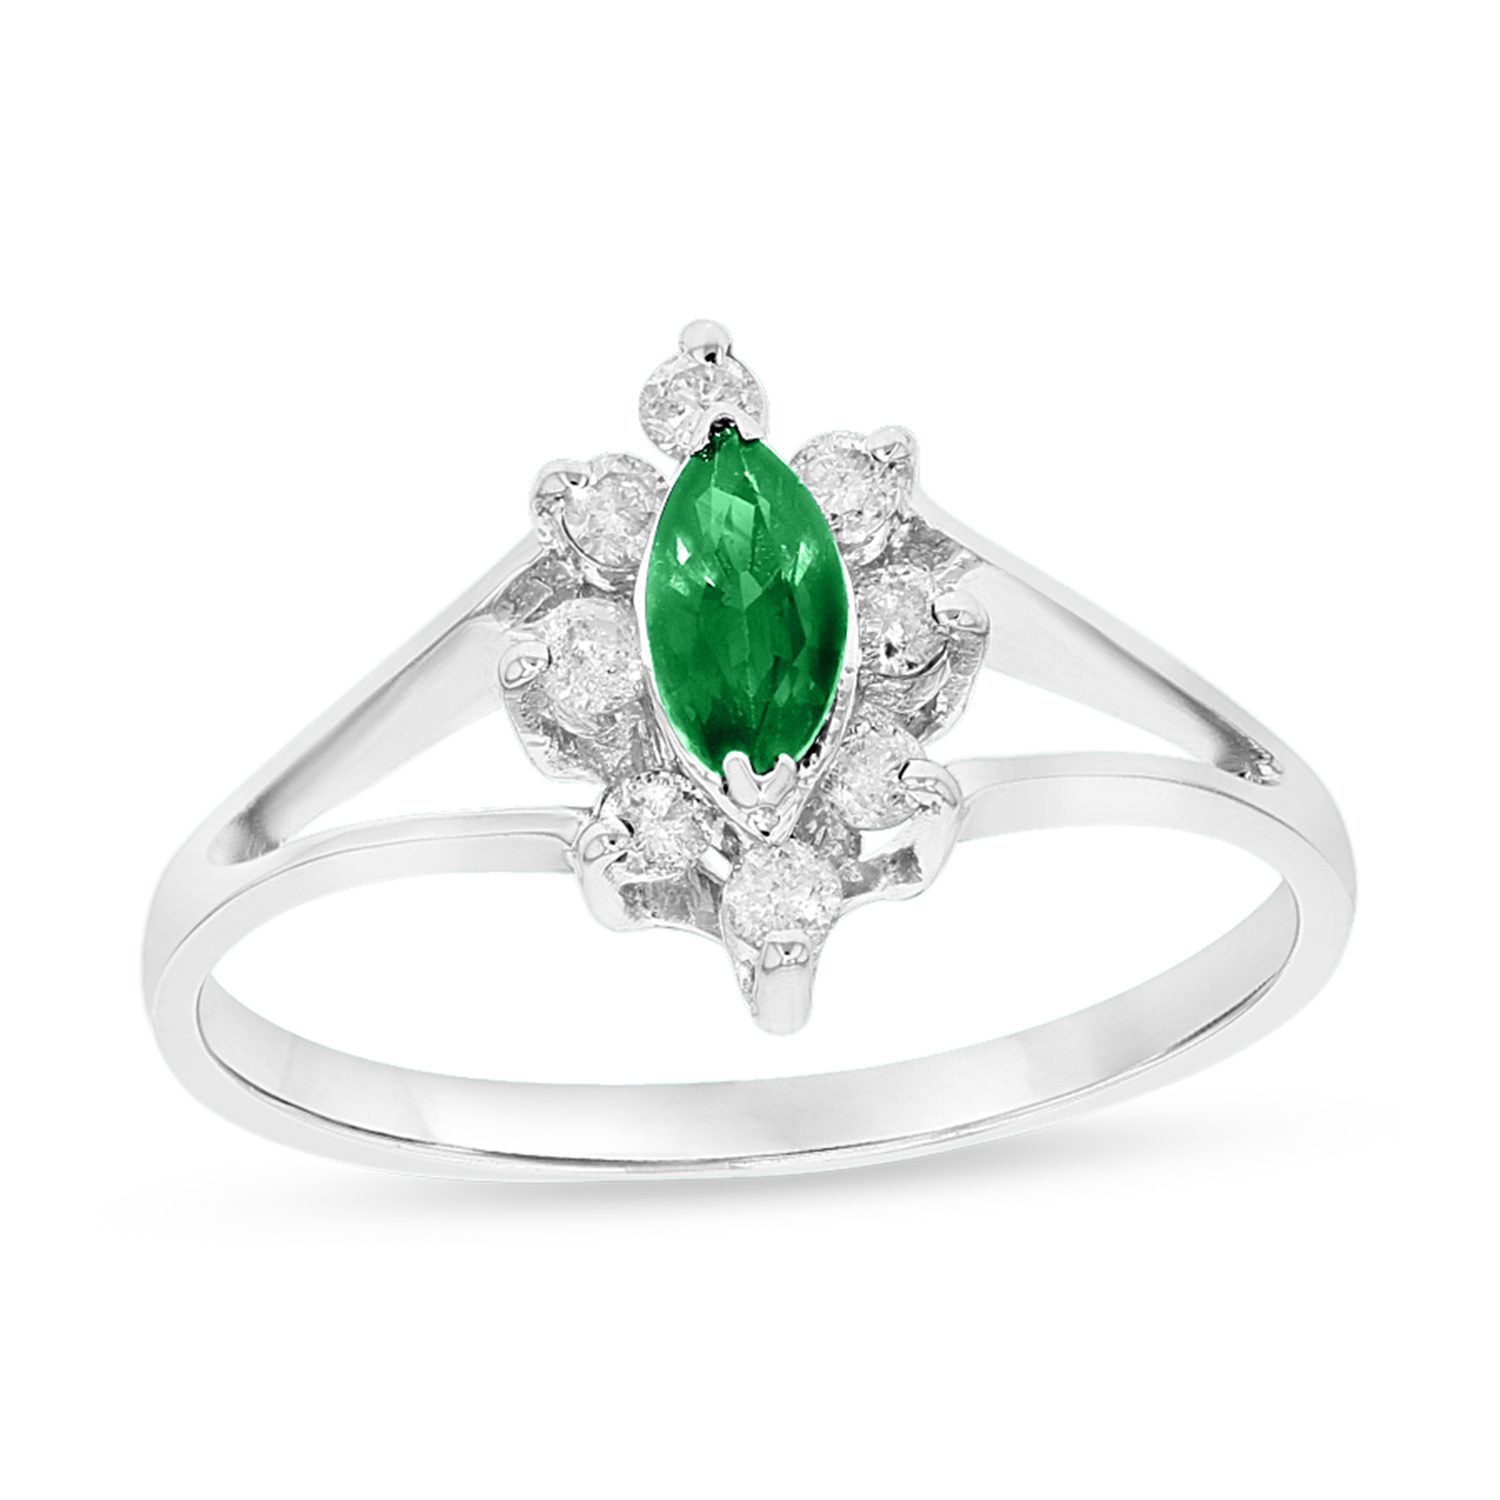 View 0.35ctw Diamond and Emerald Marquis Ring in 14k White Gold